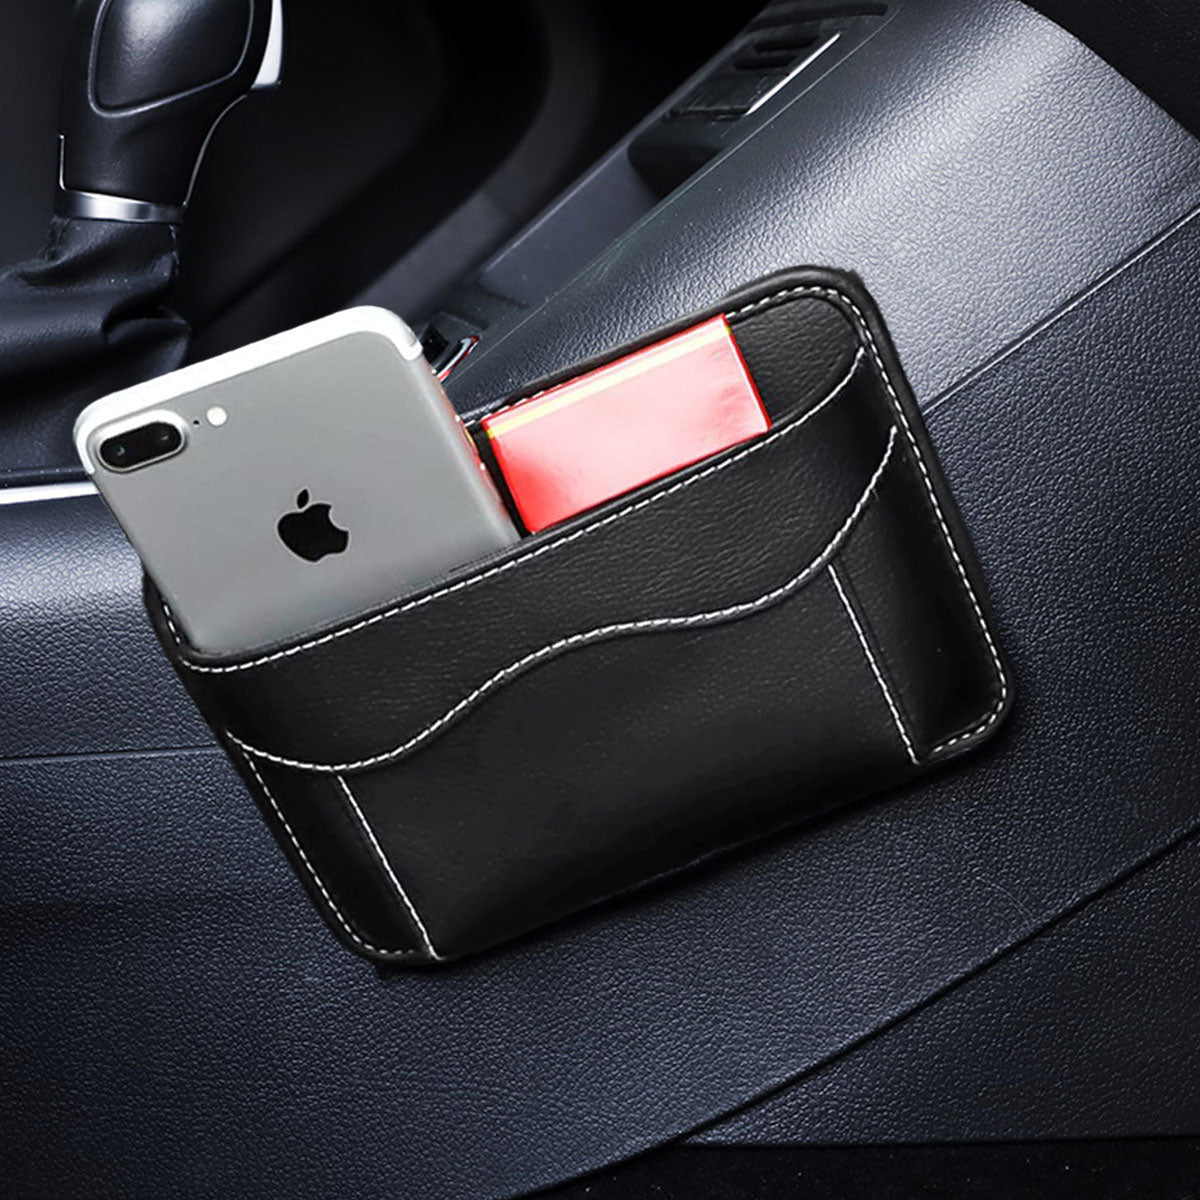 STHIRA® Car Storage Organizer Pouch Handy Storage Bag Durable PU Leather Mini Gap Storage Bag on Side of Seat, Self Adhesive Storage Organizer for Phone, Keys, Accessories, Charging Cables